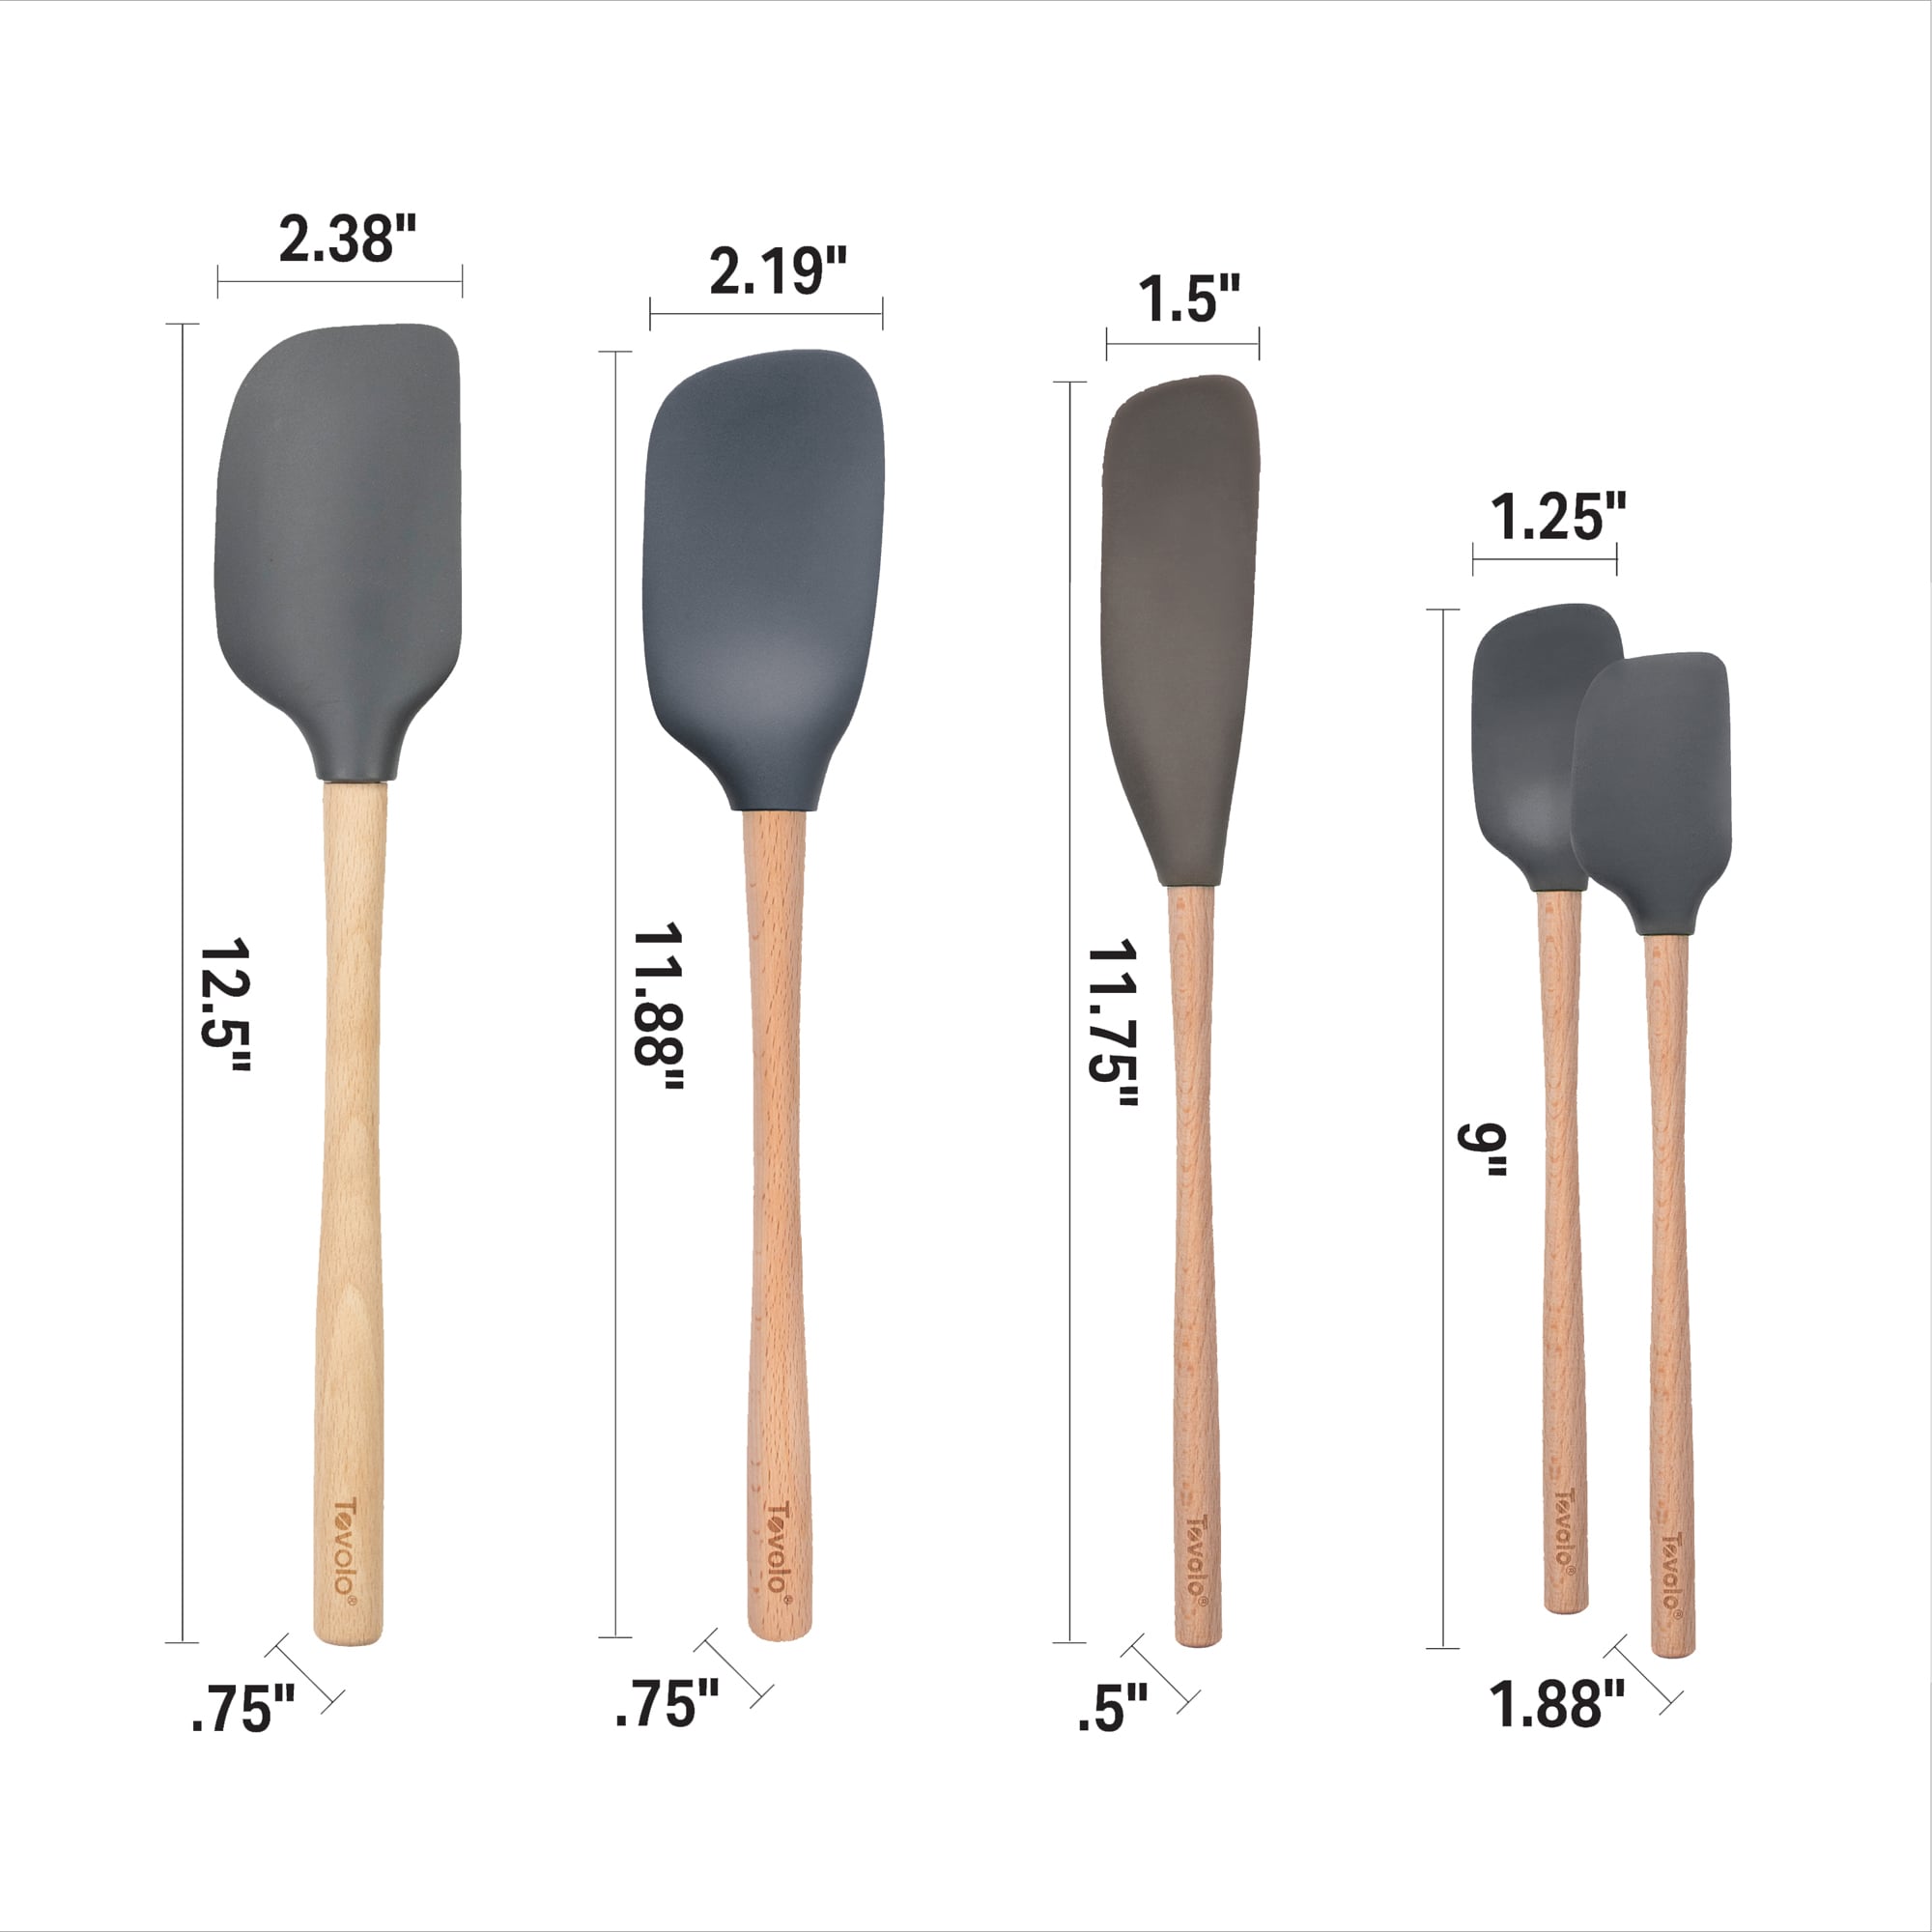 Tovolo Flex-Core Stainless Steel Handled Charcoal Spatula